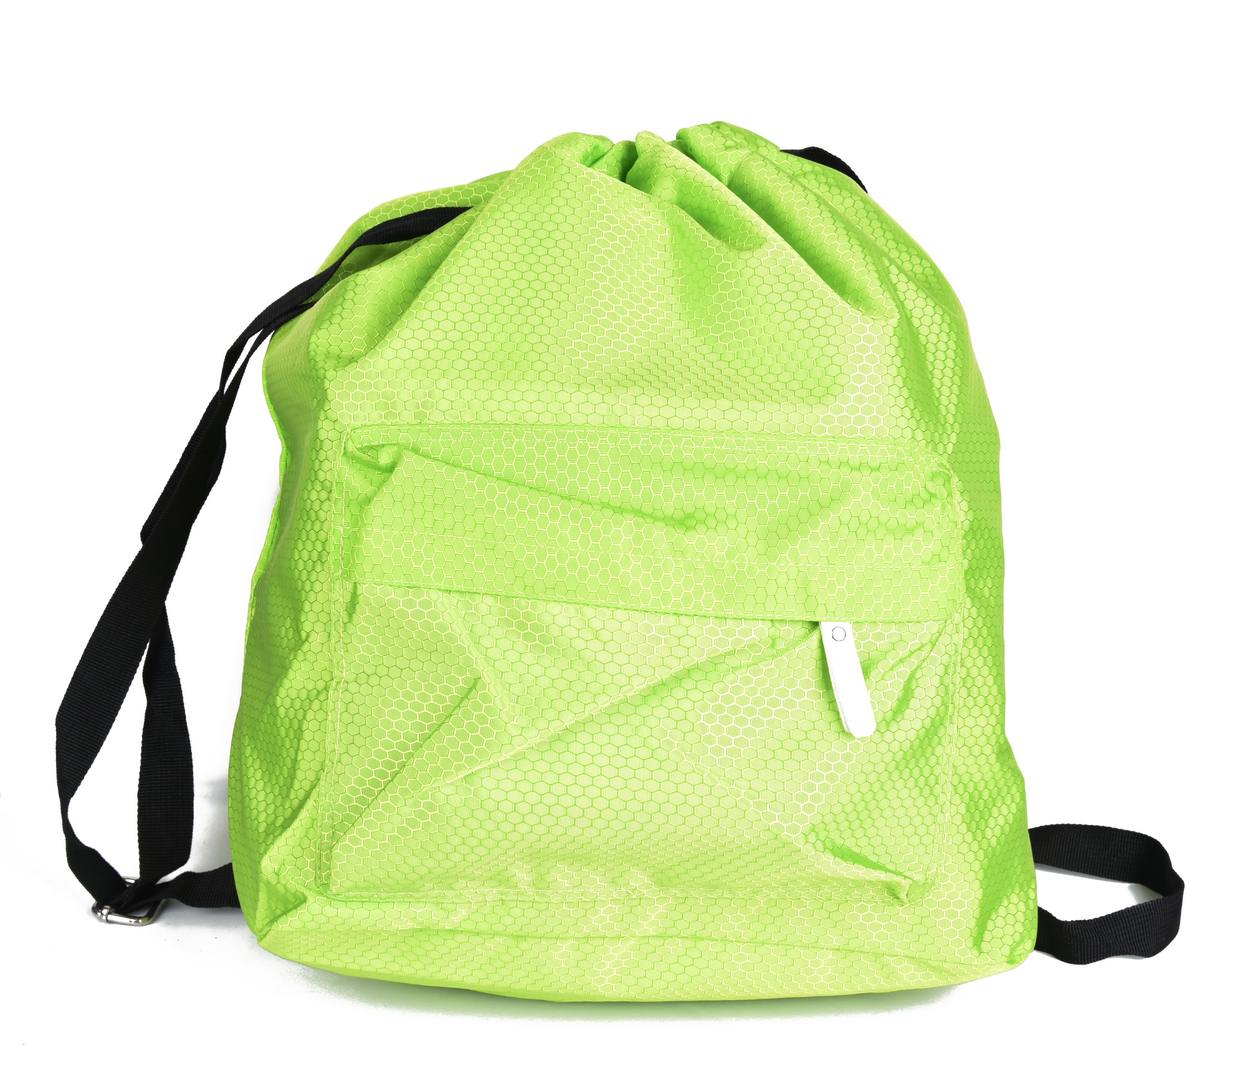 Bags For Camping, Hiking, Beach - KaroutExpress